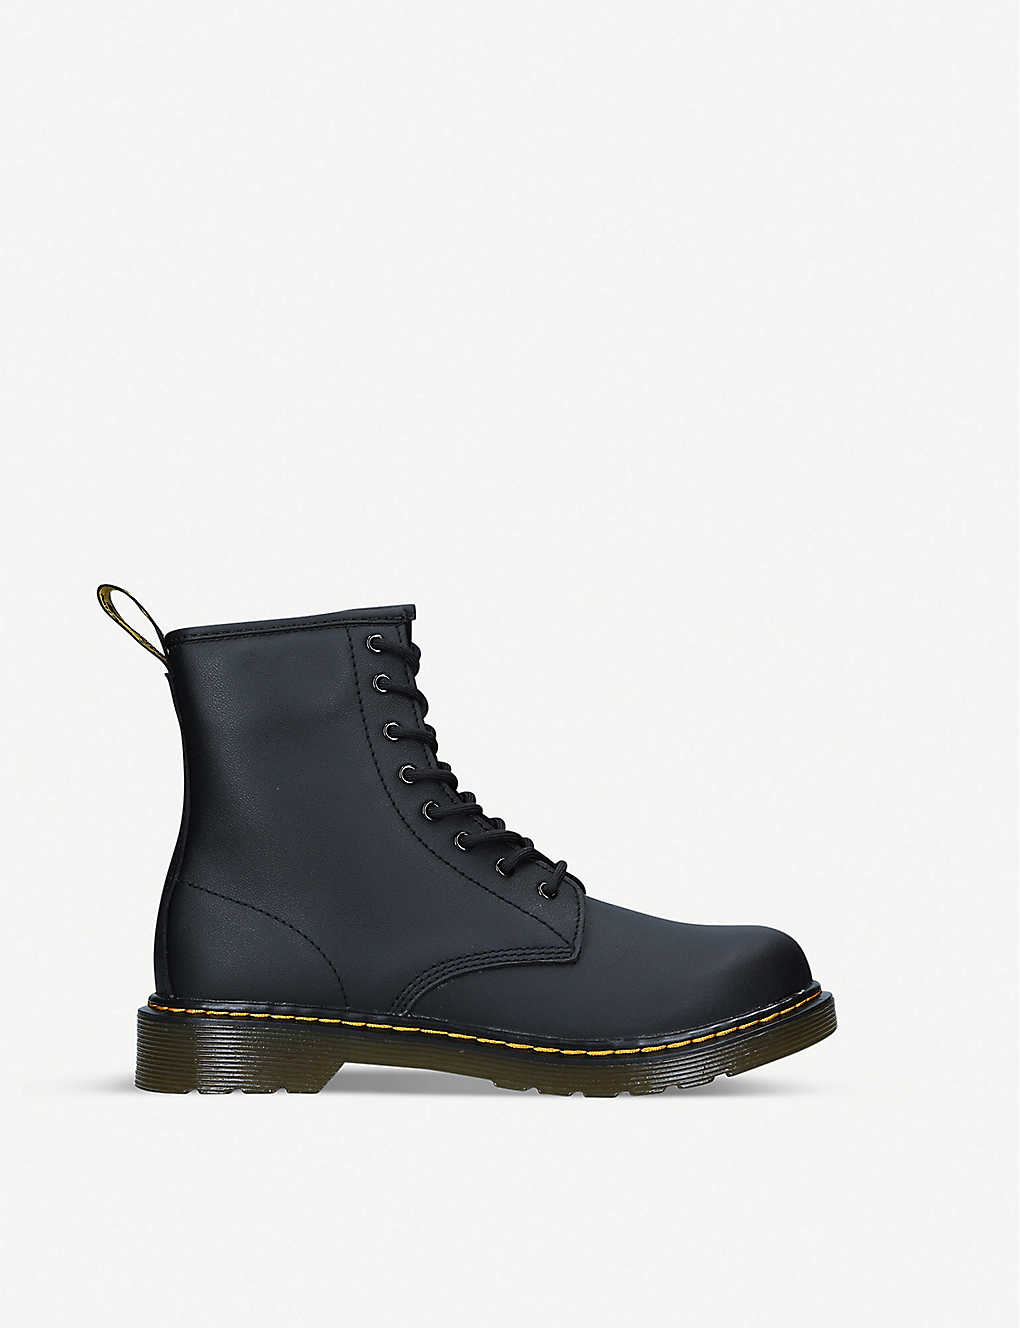 Dr. Martens' Kids' 1460 8-eye Leather Boots 3-5 Years In Black